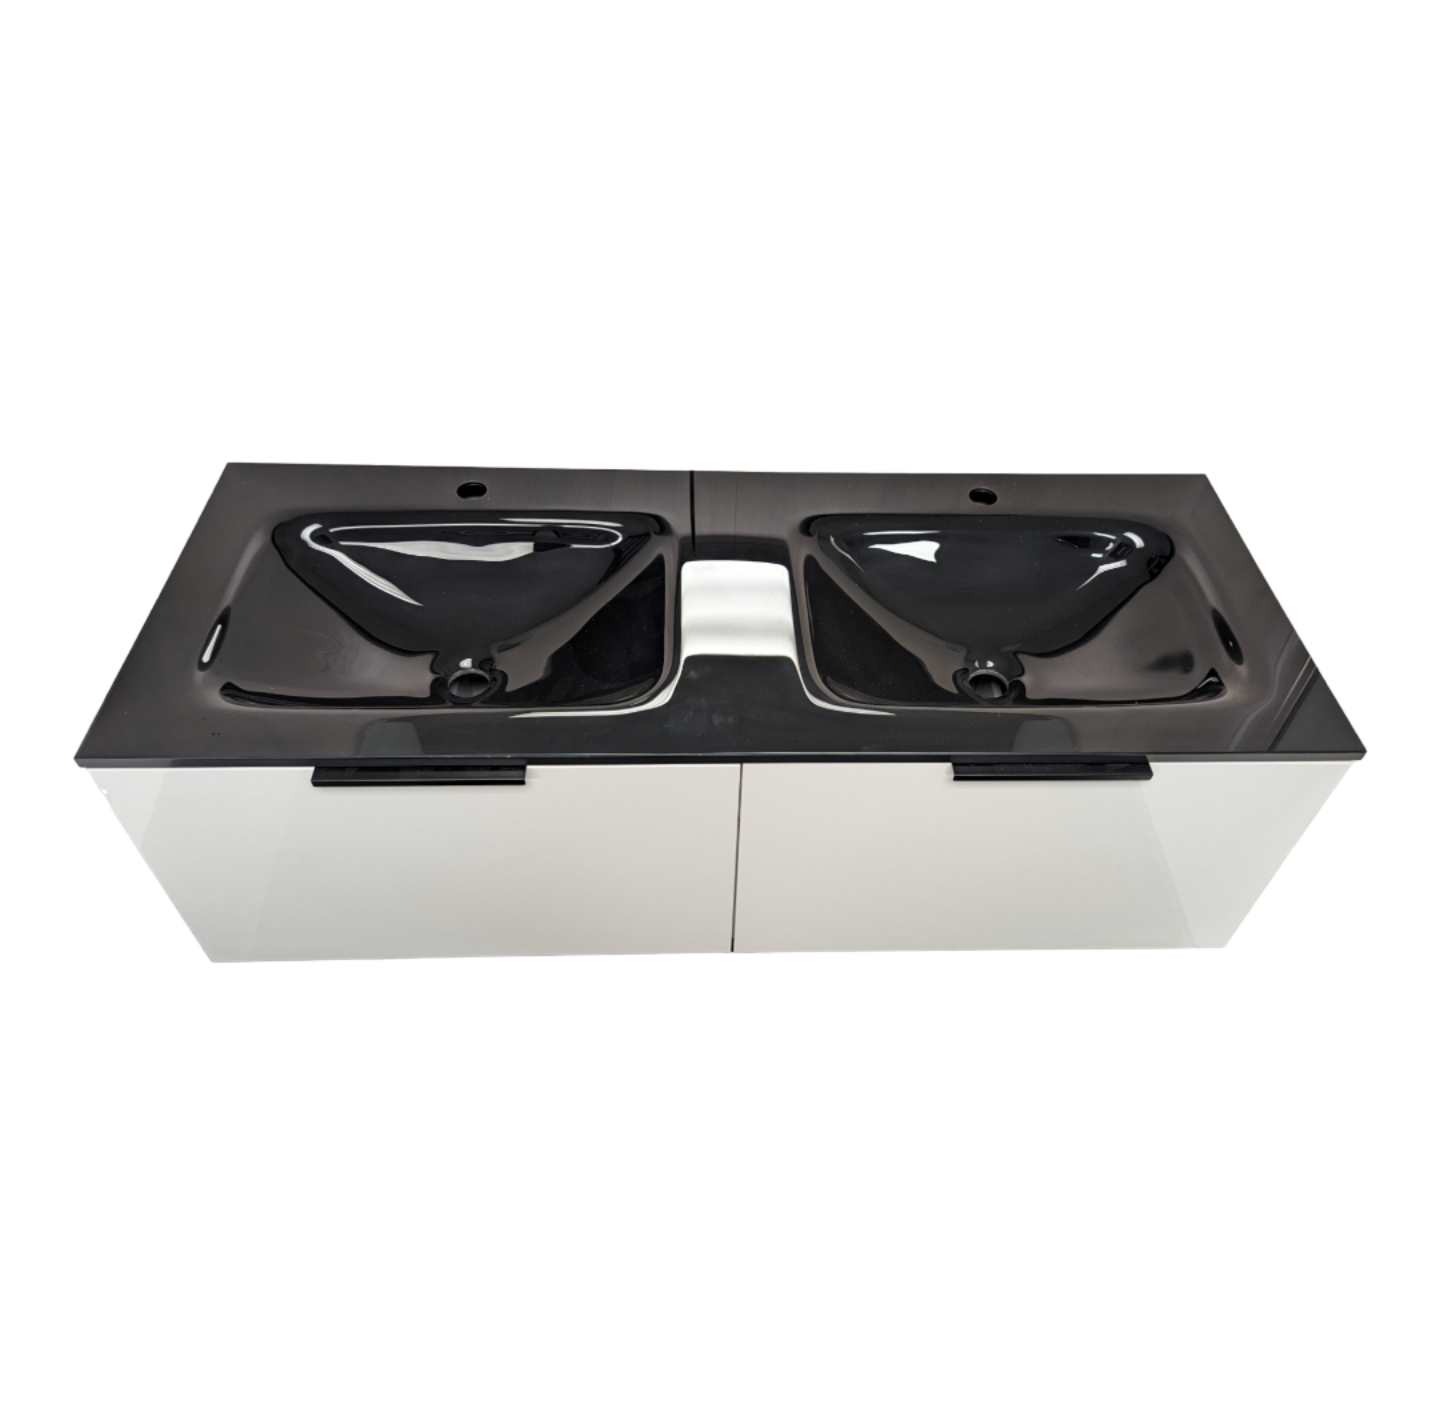 Voss Slimline Black Glass Double Sink Vanity Top without Overflow 1200 x 460 x 180mm